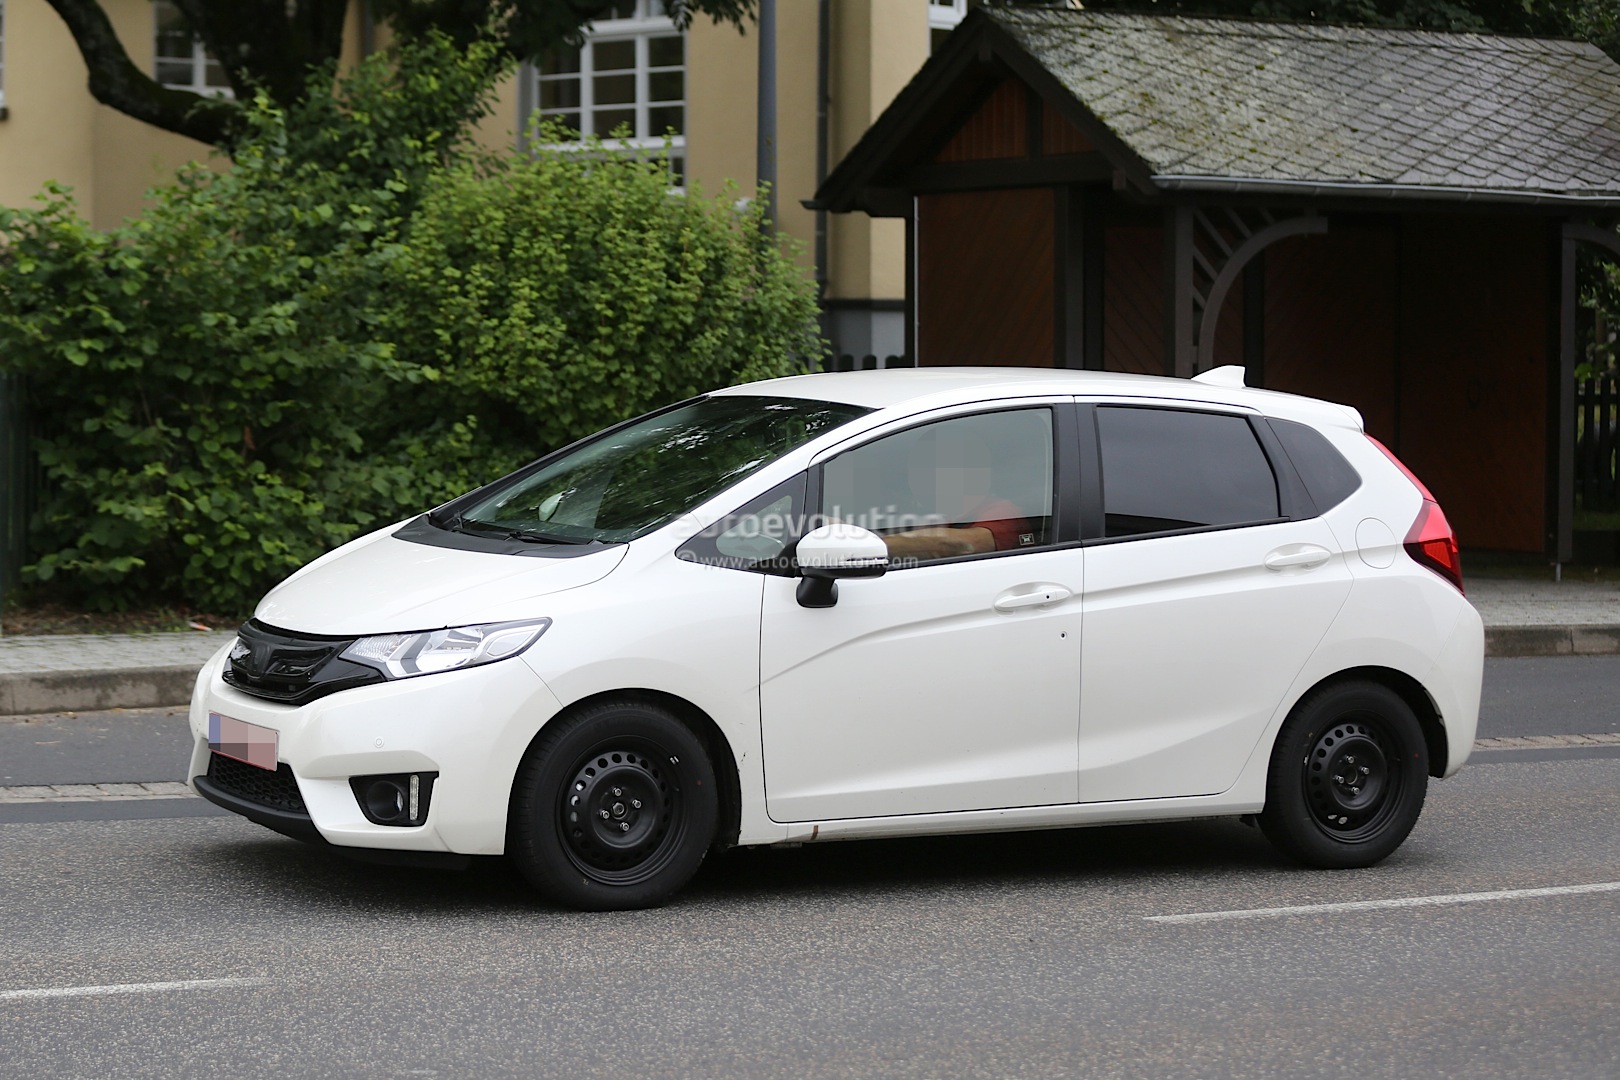 Spyshots: All-New 2015 Honda Jazz Testing in Europe for the First Time